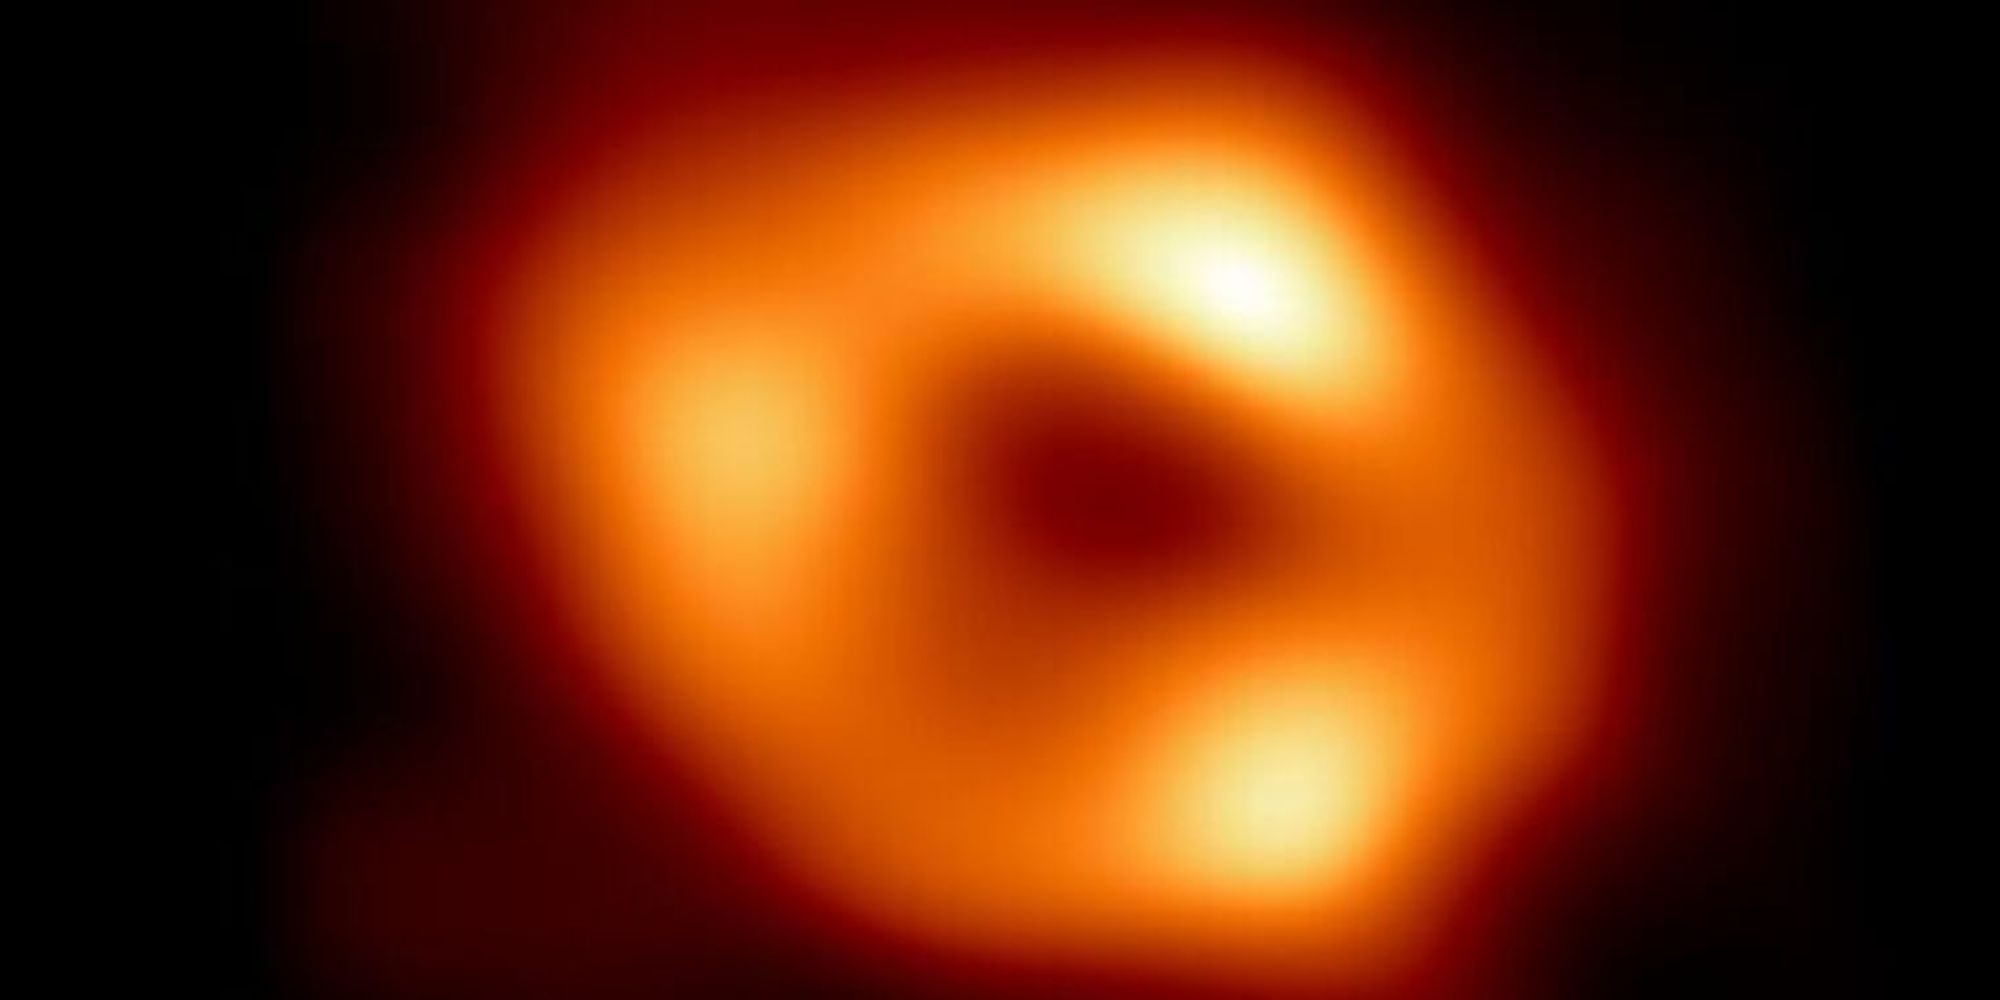 Feast your eyes on the first image of the black hole at the center of our Milky Way